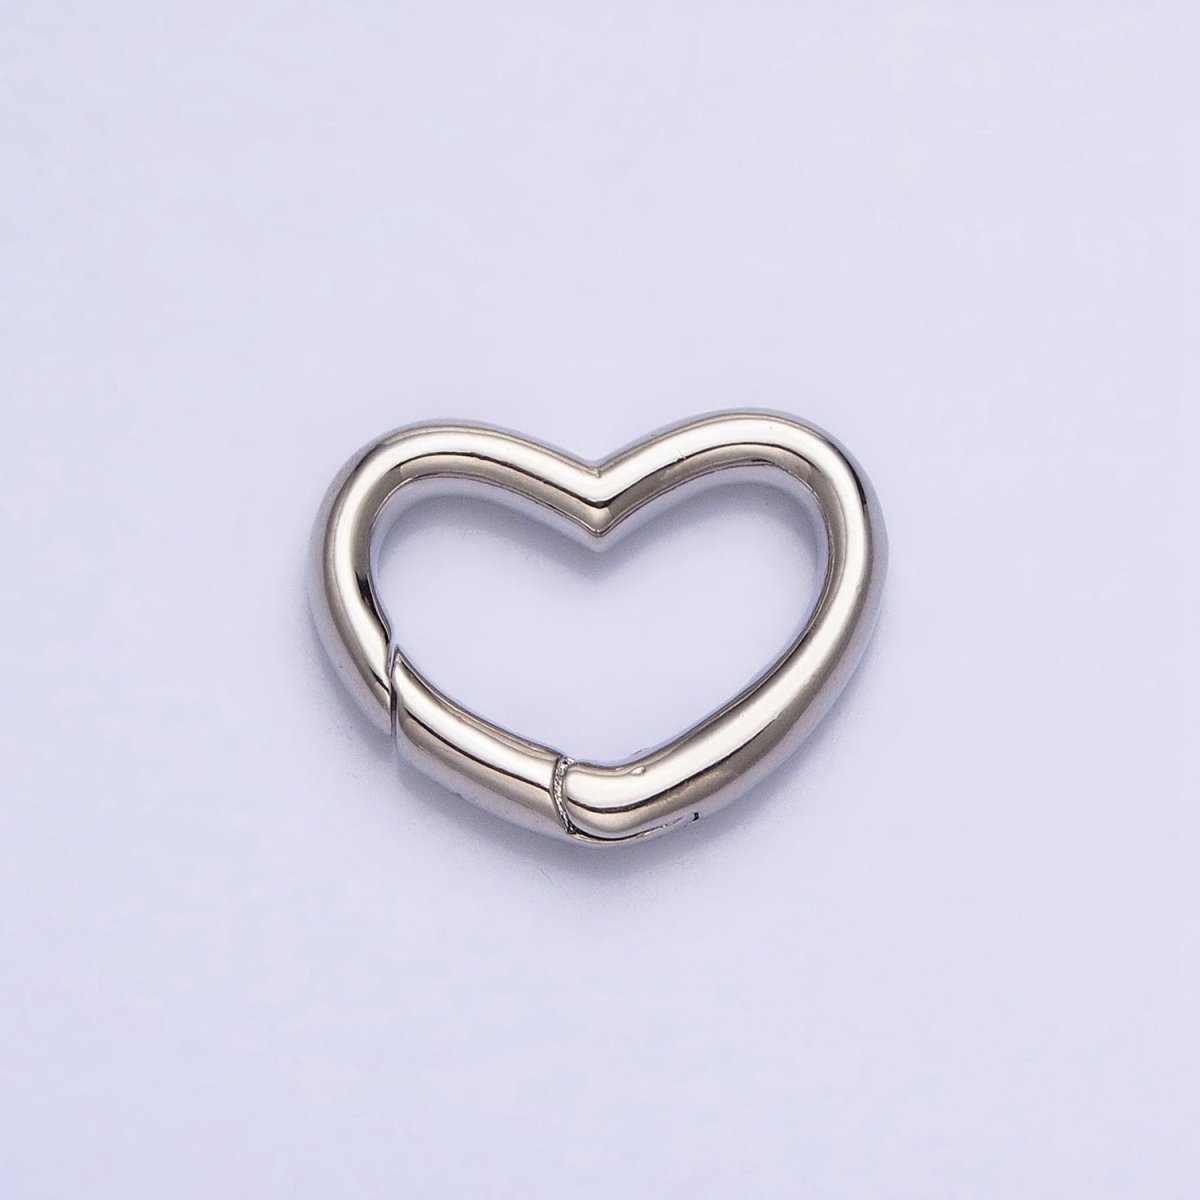 Dainty Gold Spring Gate Ring, Push Gate ring, 16.6x13mm Heart Clasp Charm Holder Gold SilverClasp for Link Chain Connector Z-173 Z-174 - DLUXCA